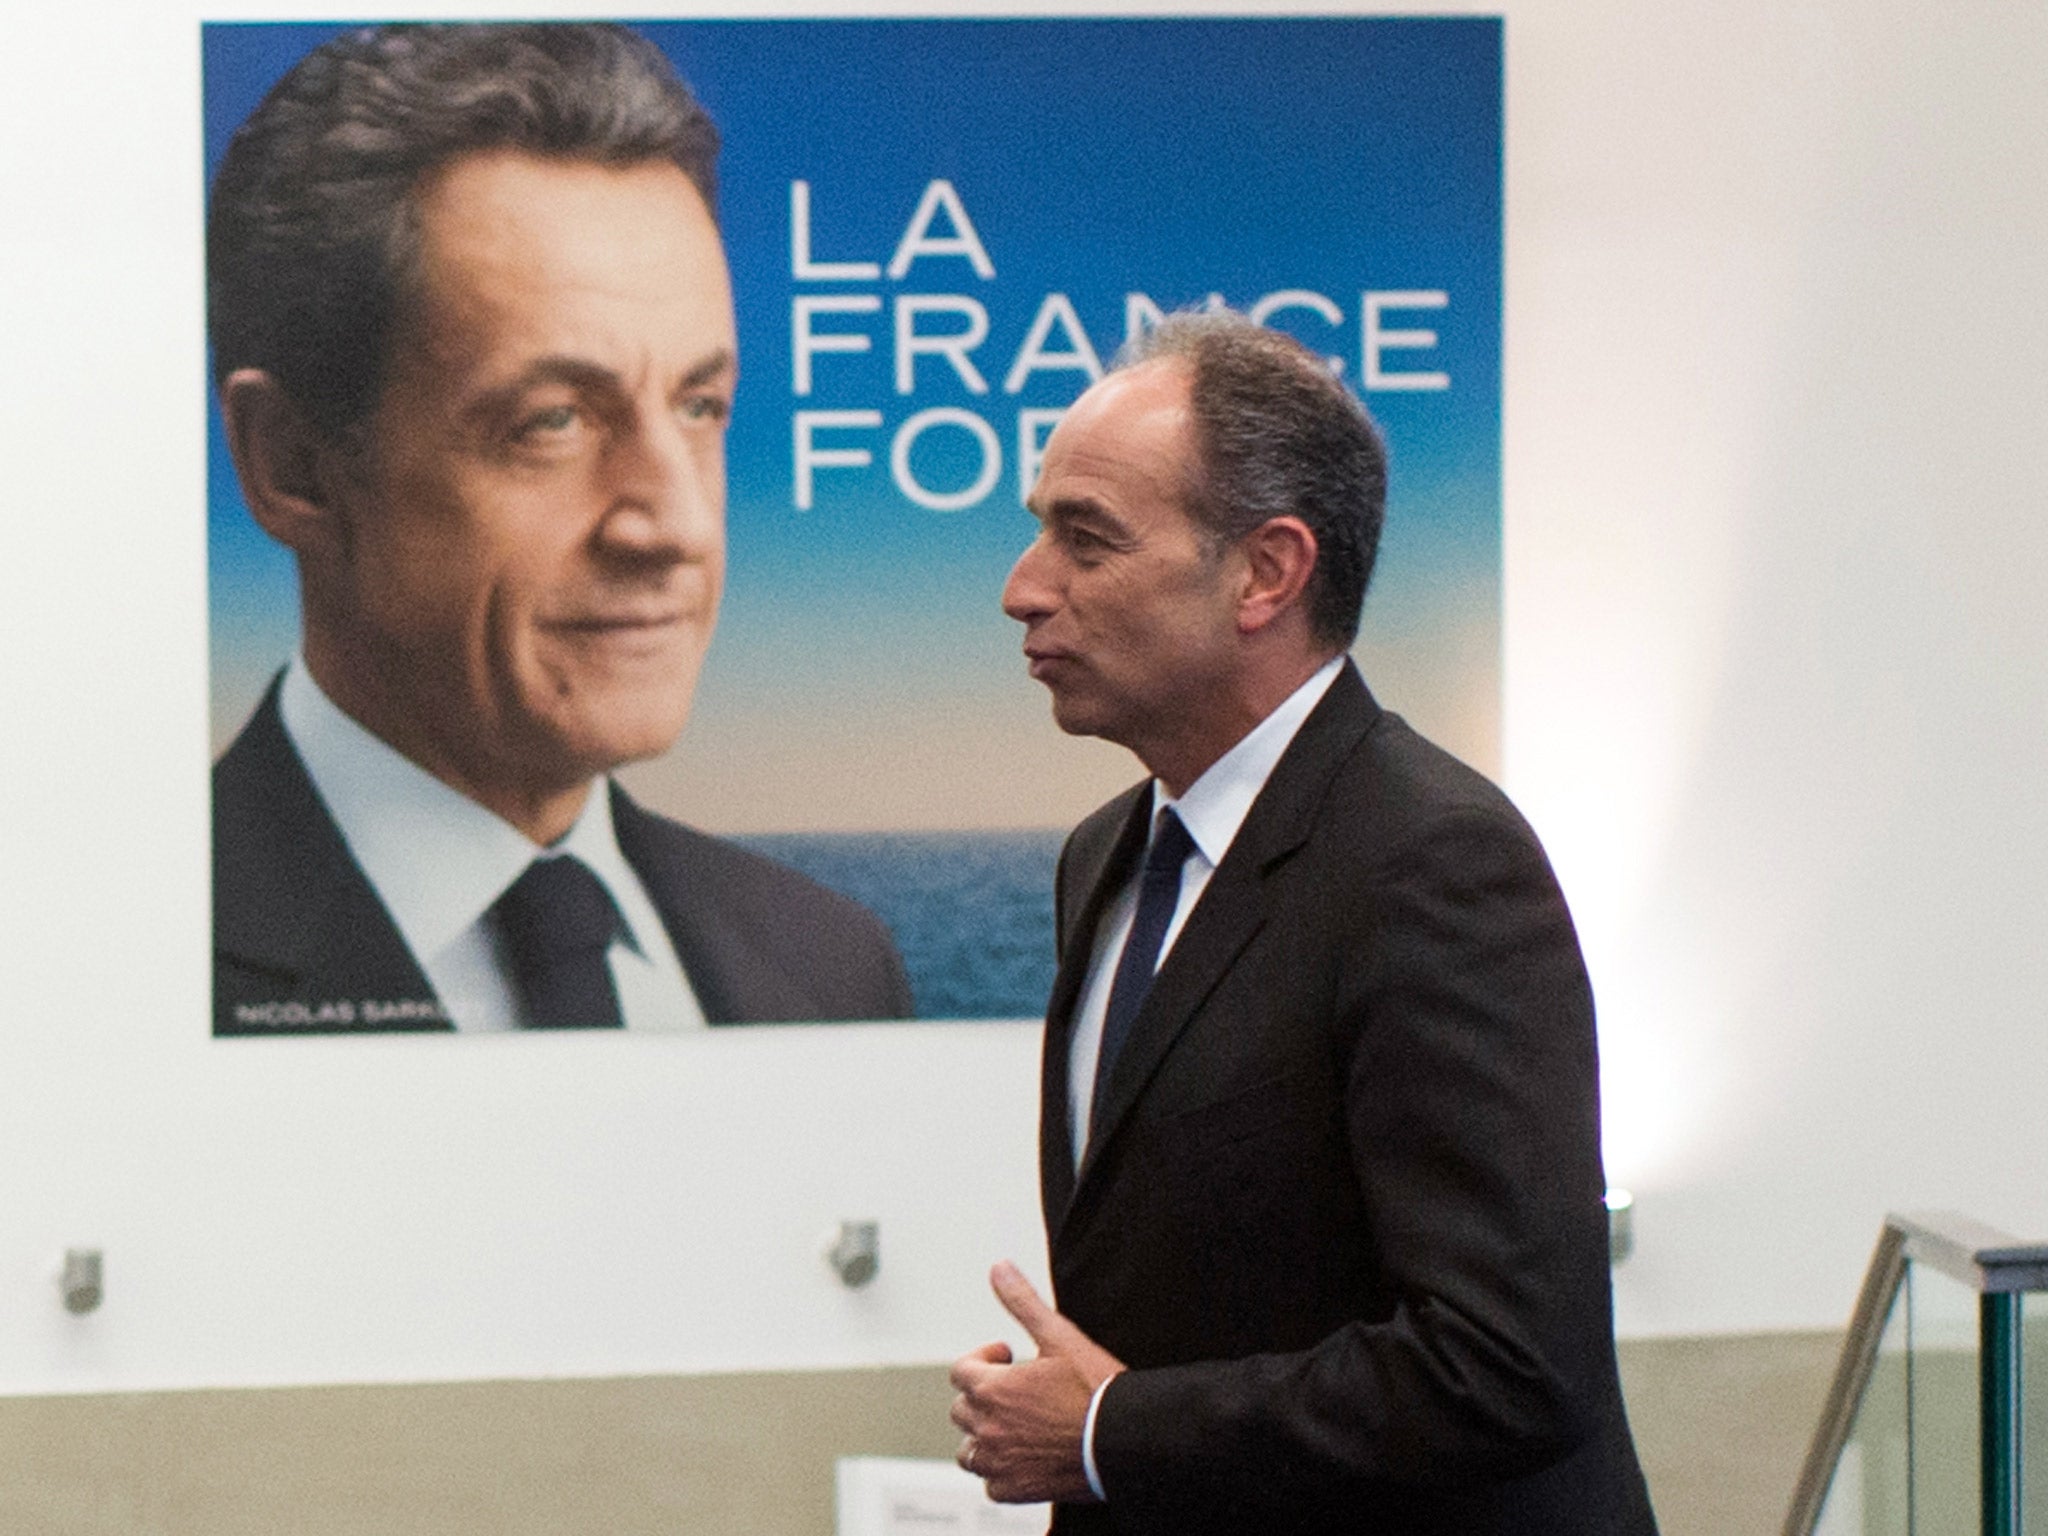 Jean-Francois Cope walks by a presidential campaign poster of former French president Nicolas Sarkozy, earlier this year